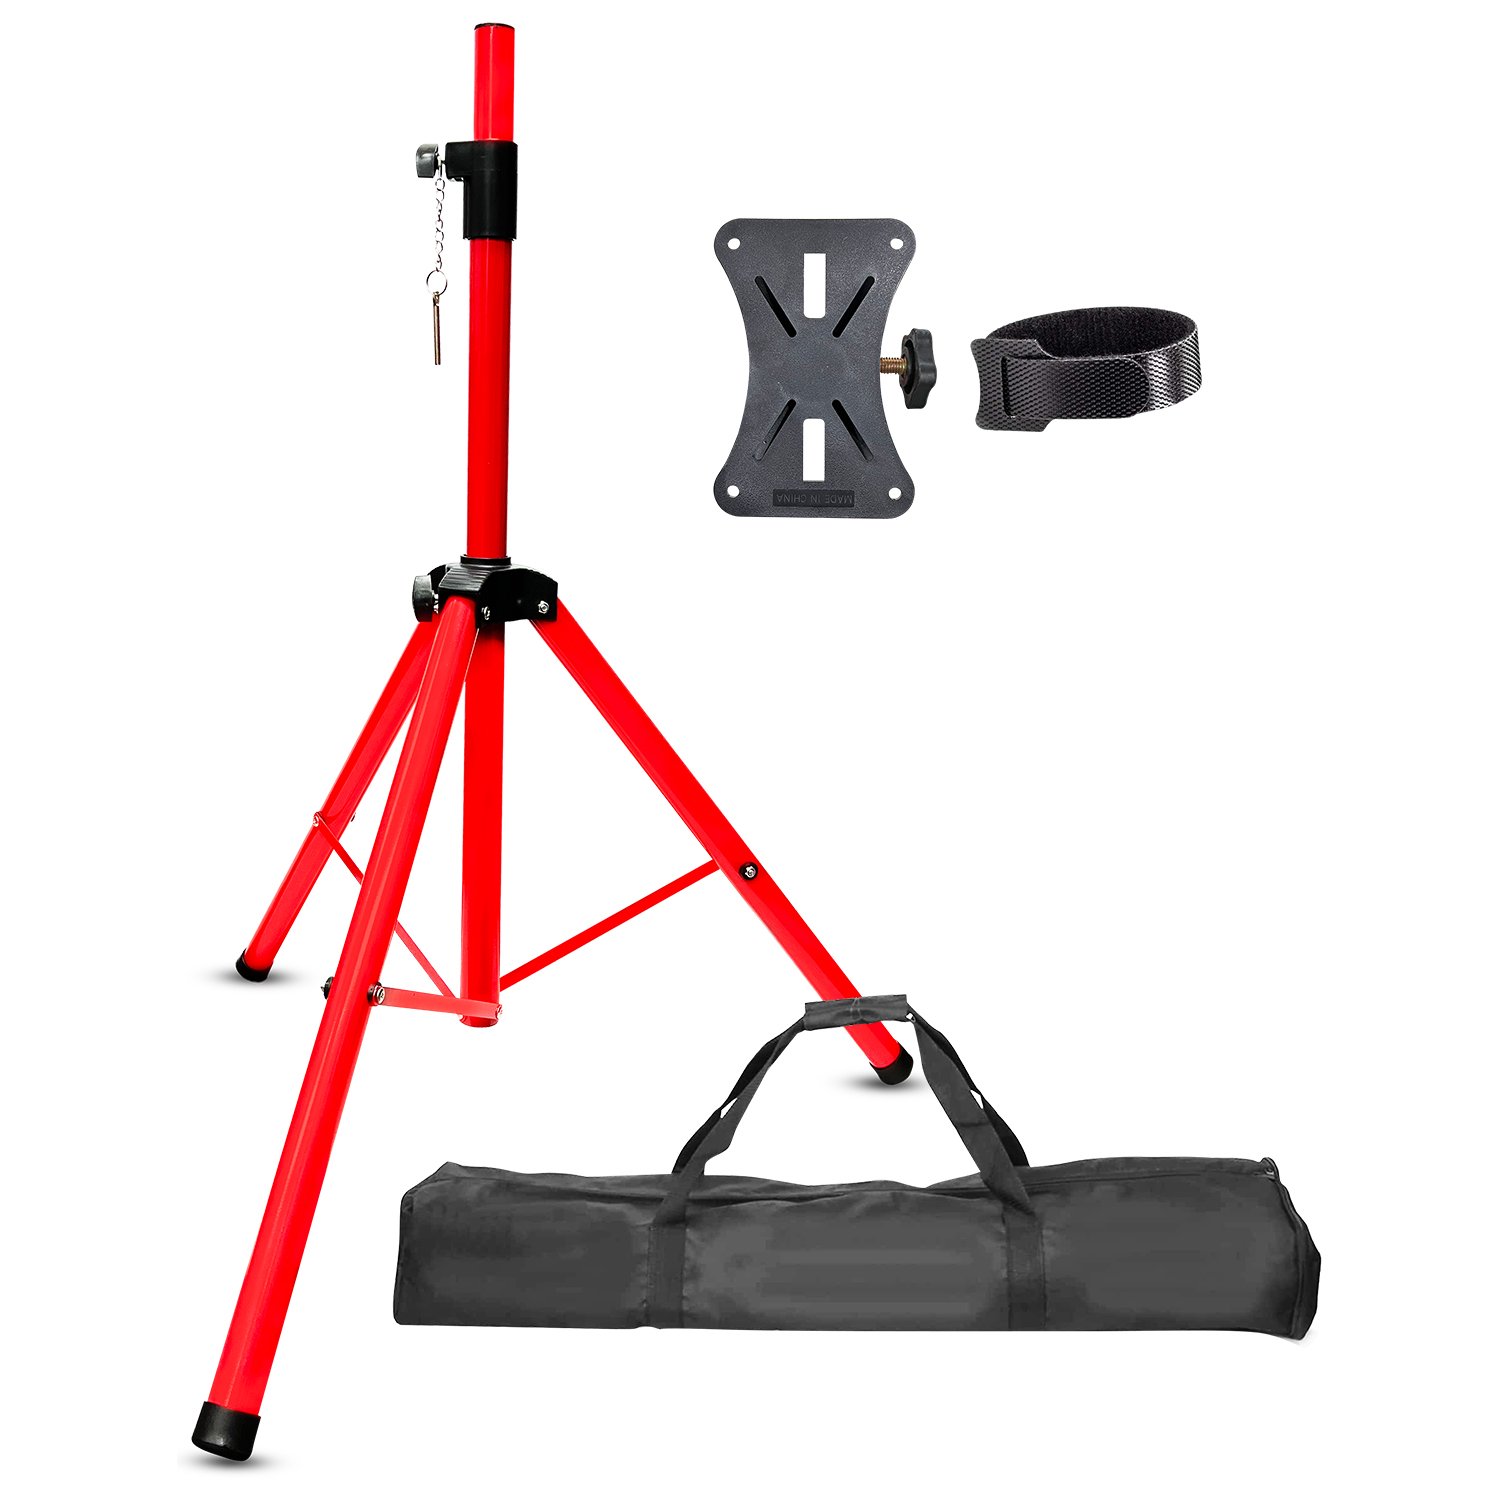 5 Core Professional Speaker Tripod Stand Adjustable Up to 72" Heavy Duty Steel SS HD 1 PK RED